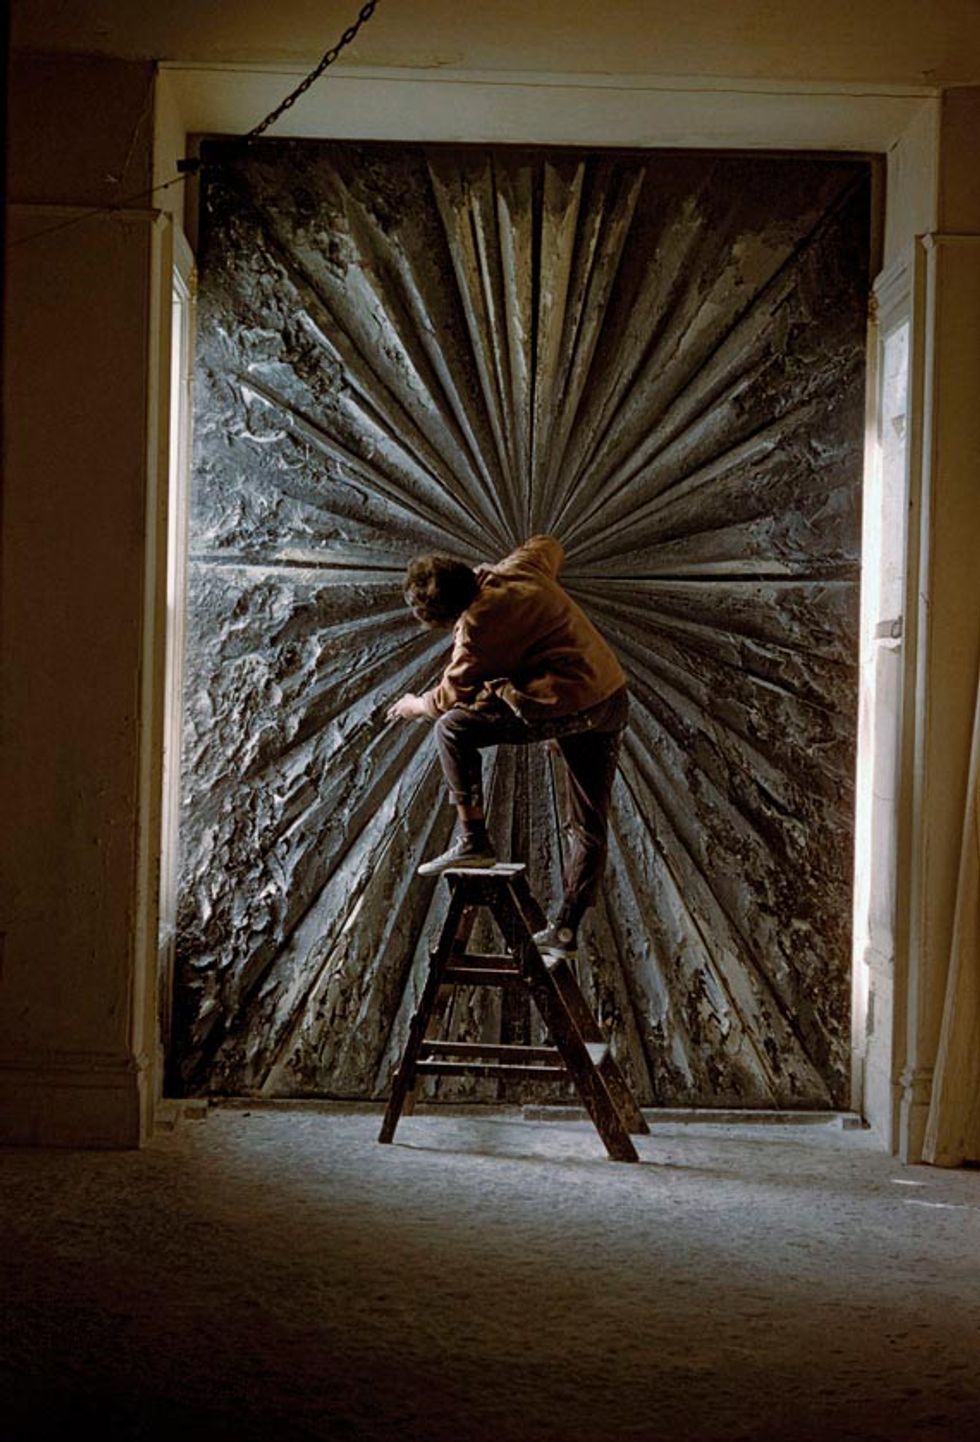 Beat-Era Artist Jay DeFeo's Famed "The Rose" Comes to SFMoMA